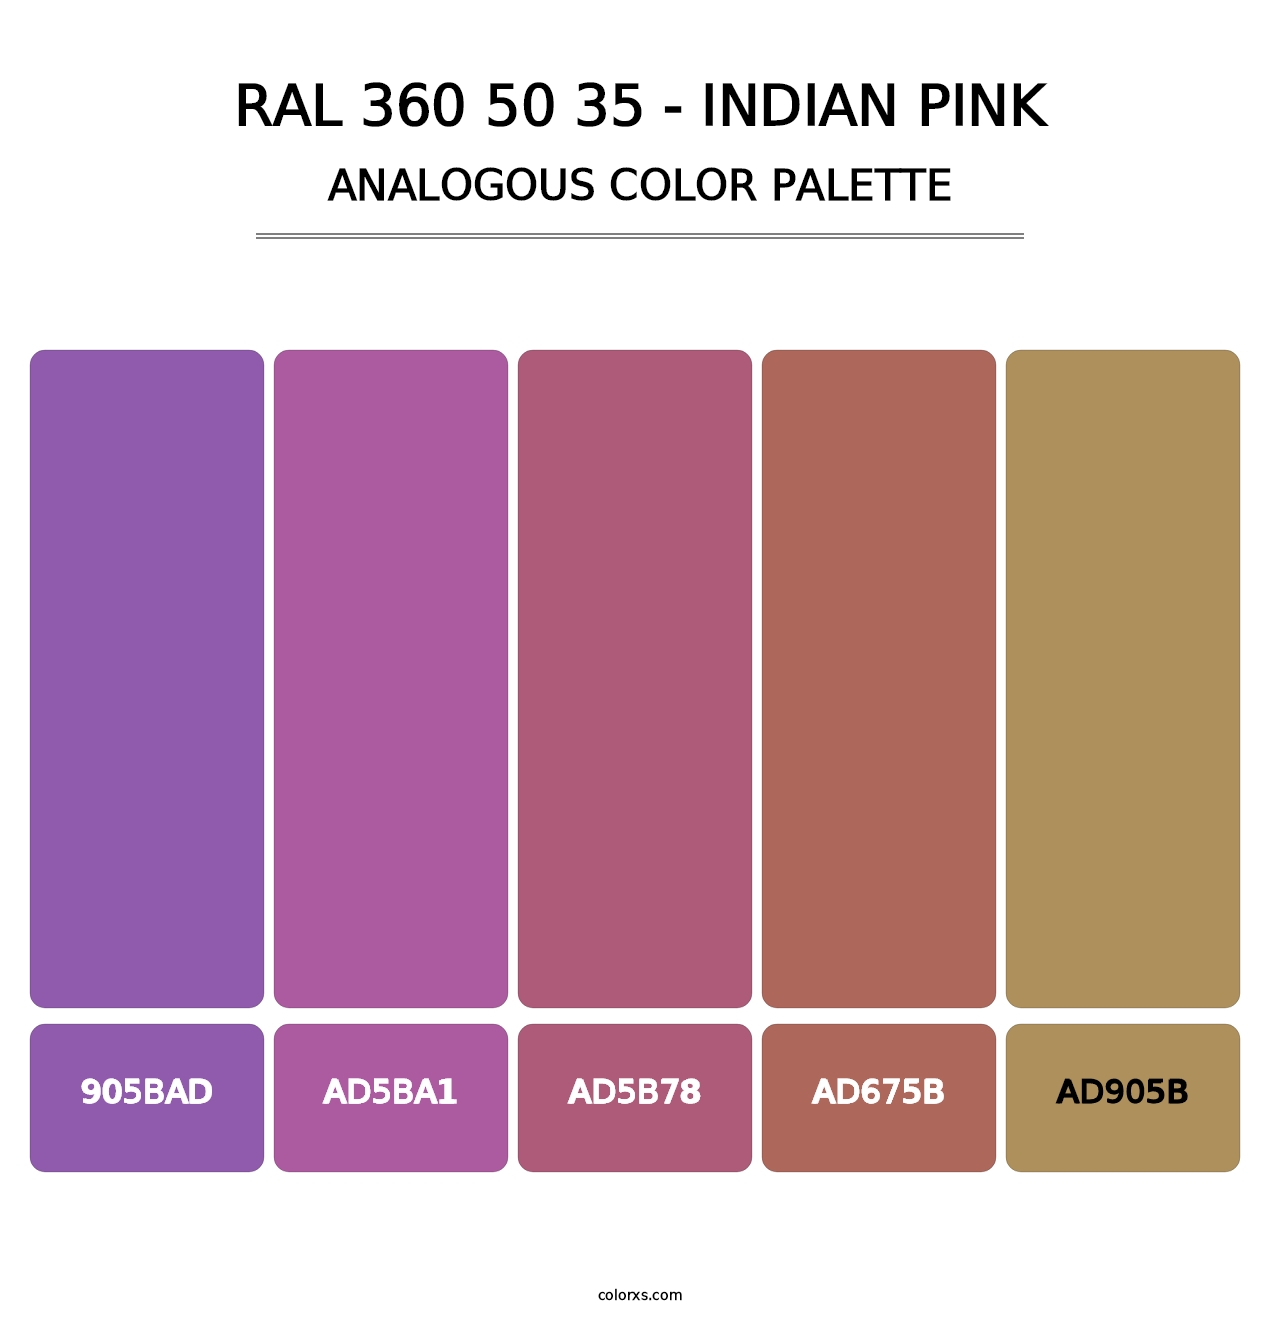 RAL 360 50 35 - Indian Pink - Analogous Color Palette